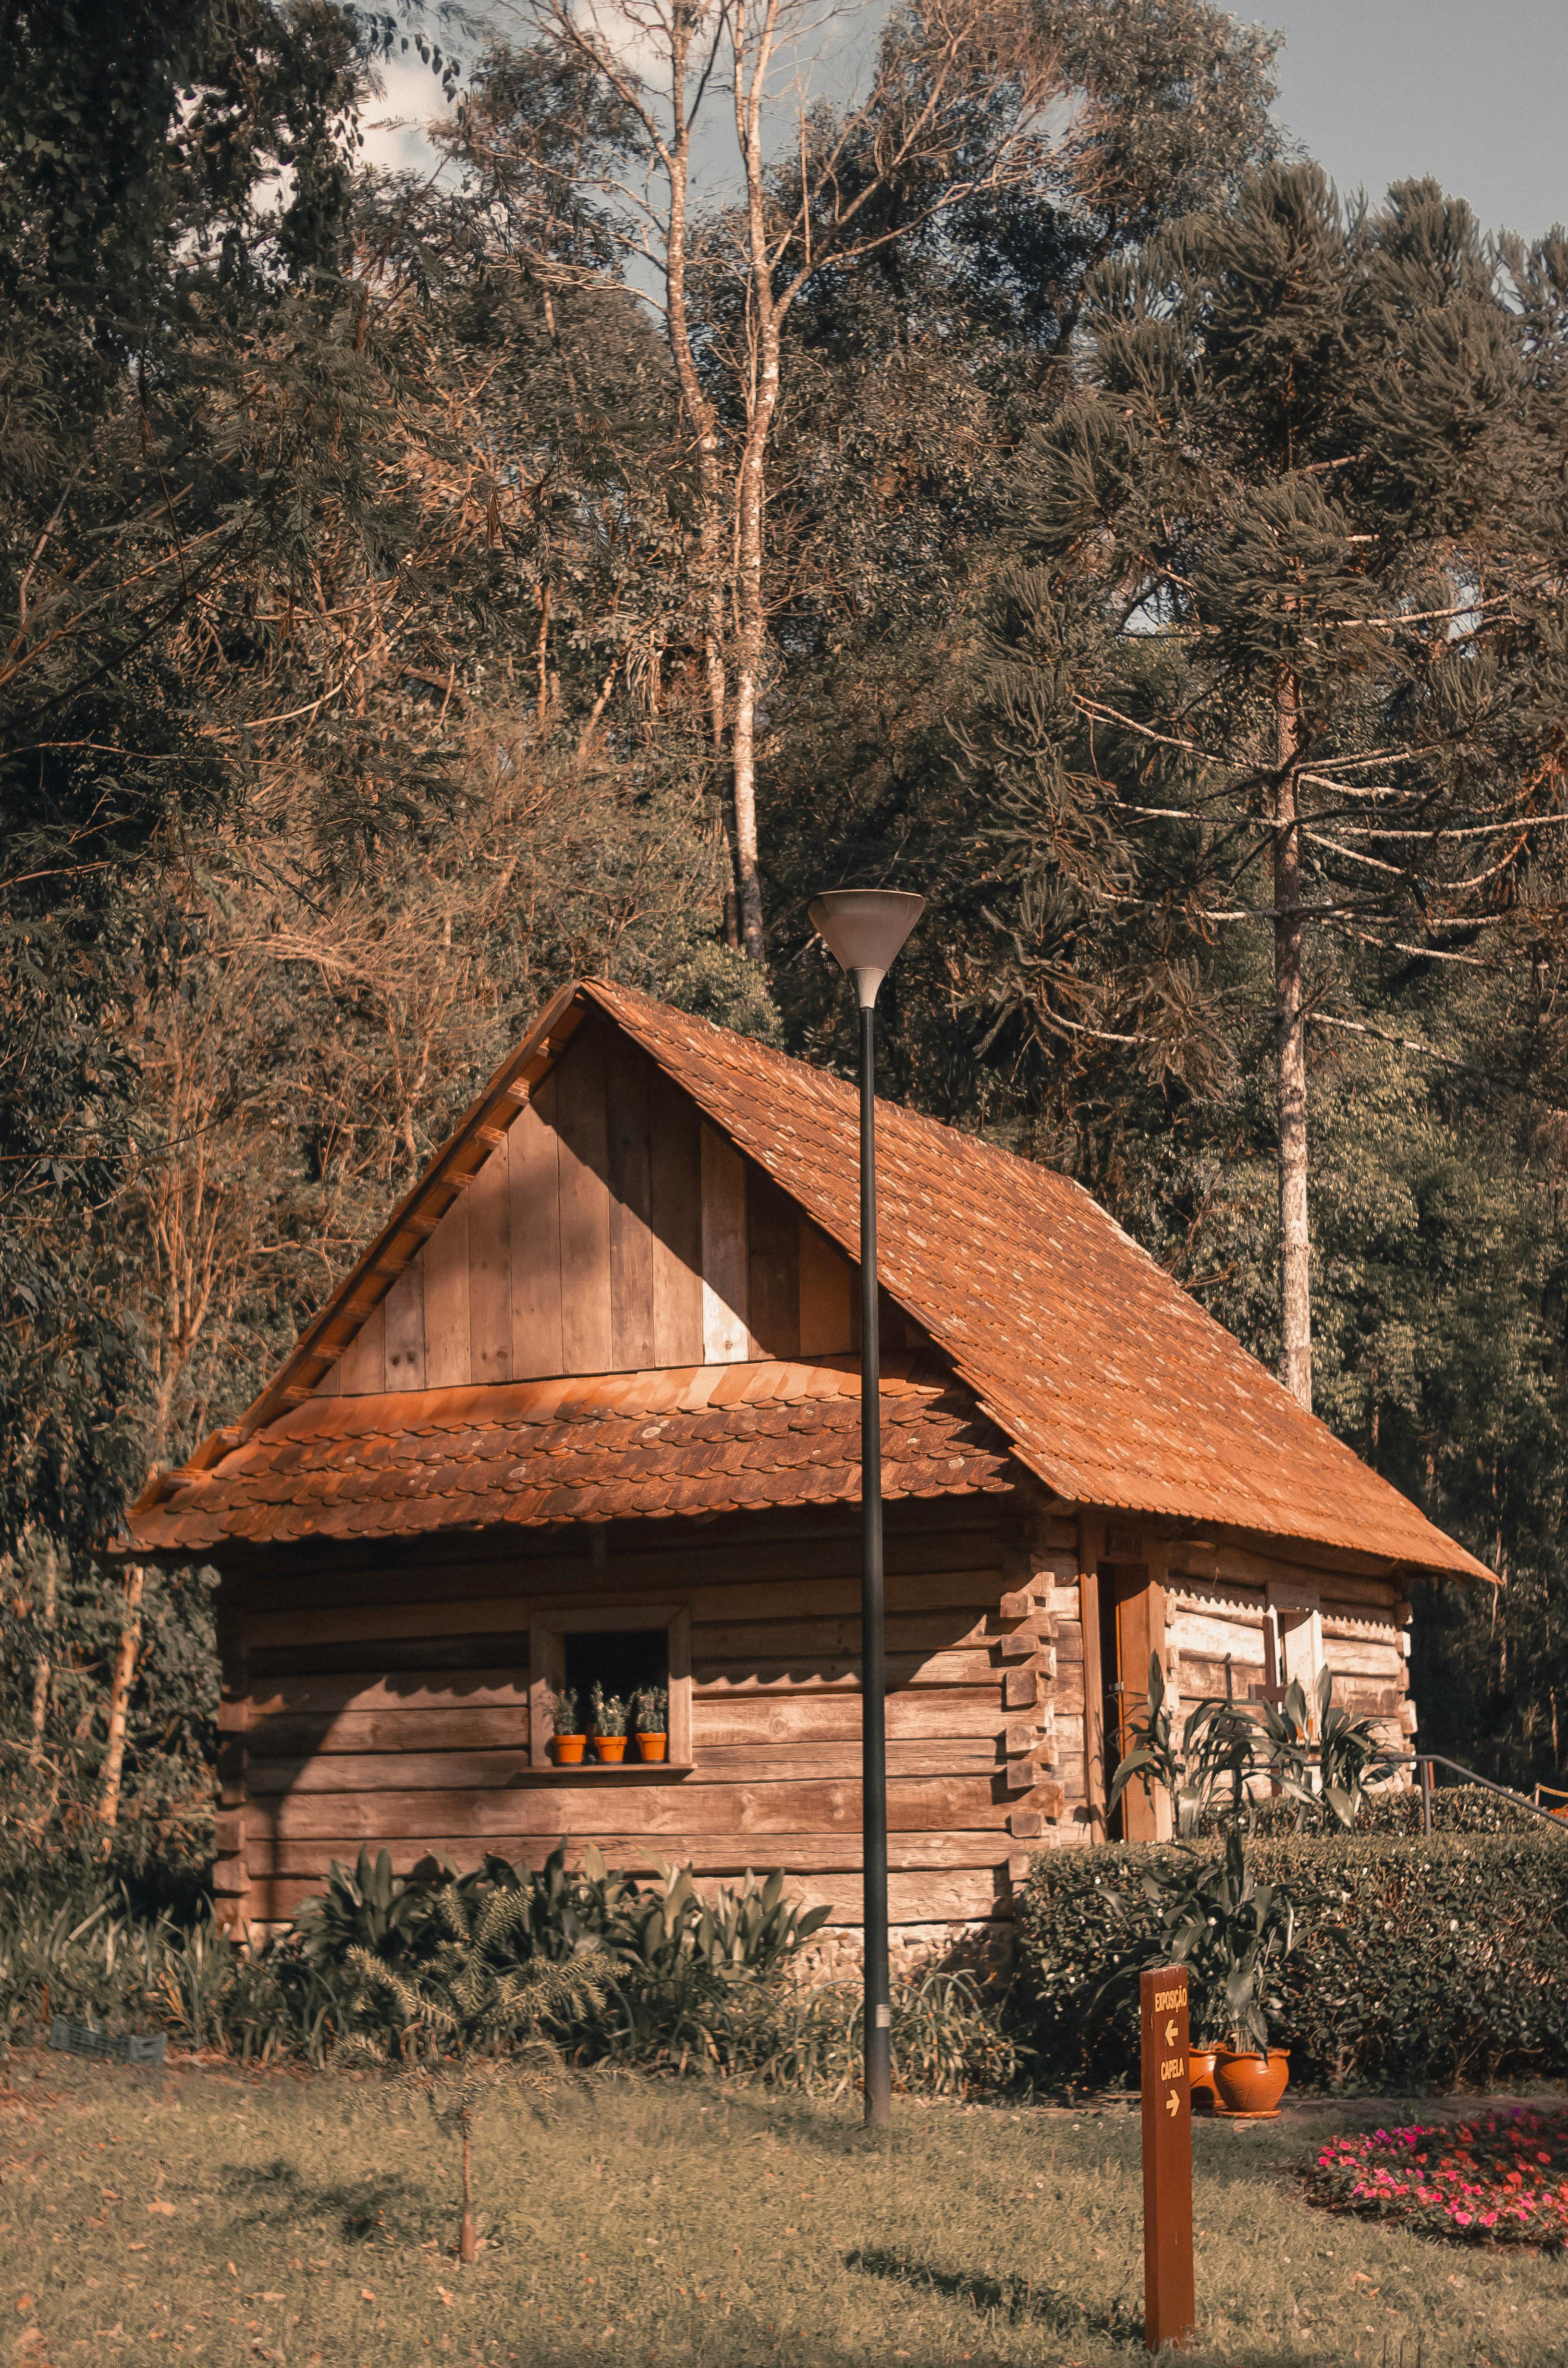 wood house wallpaper in forest